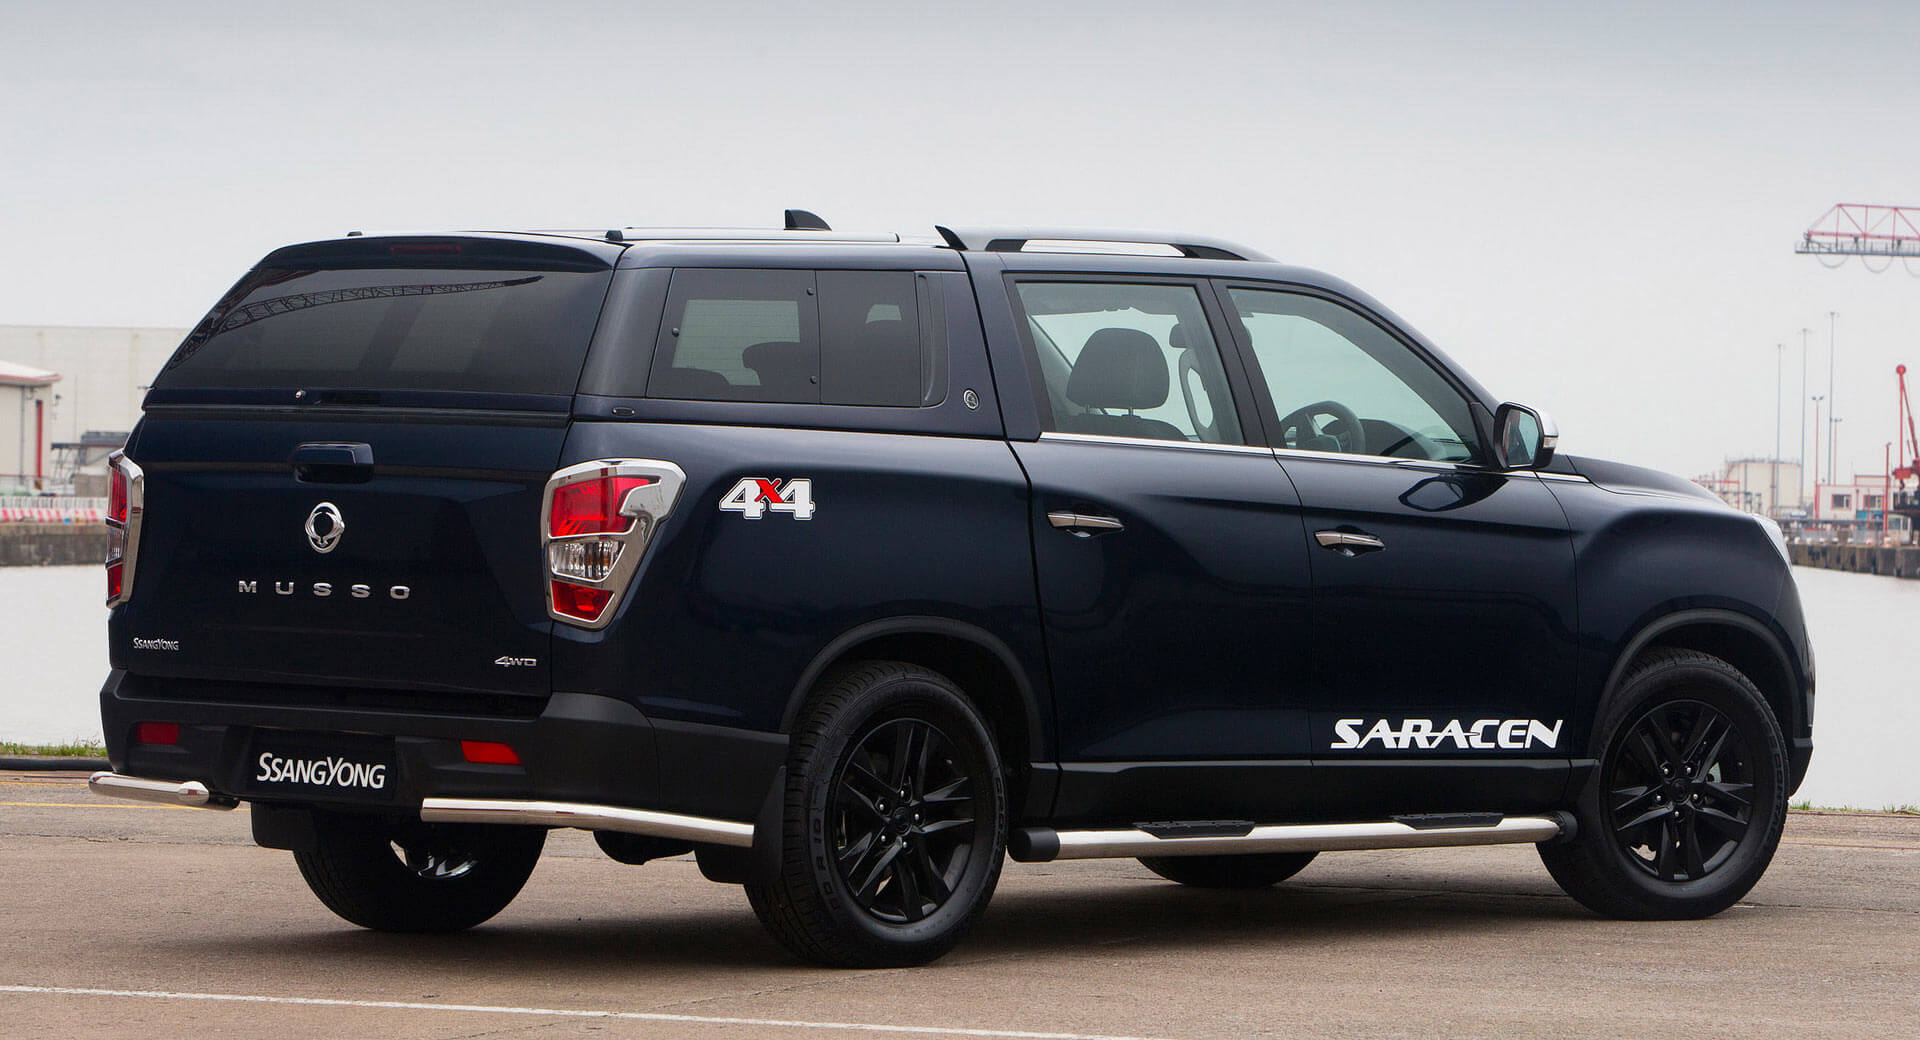 SsangYong Musso - Latest News | Carscoops